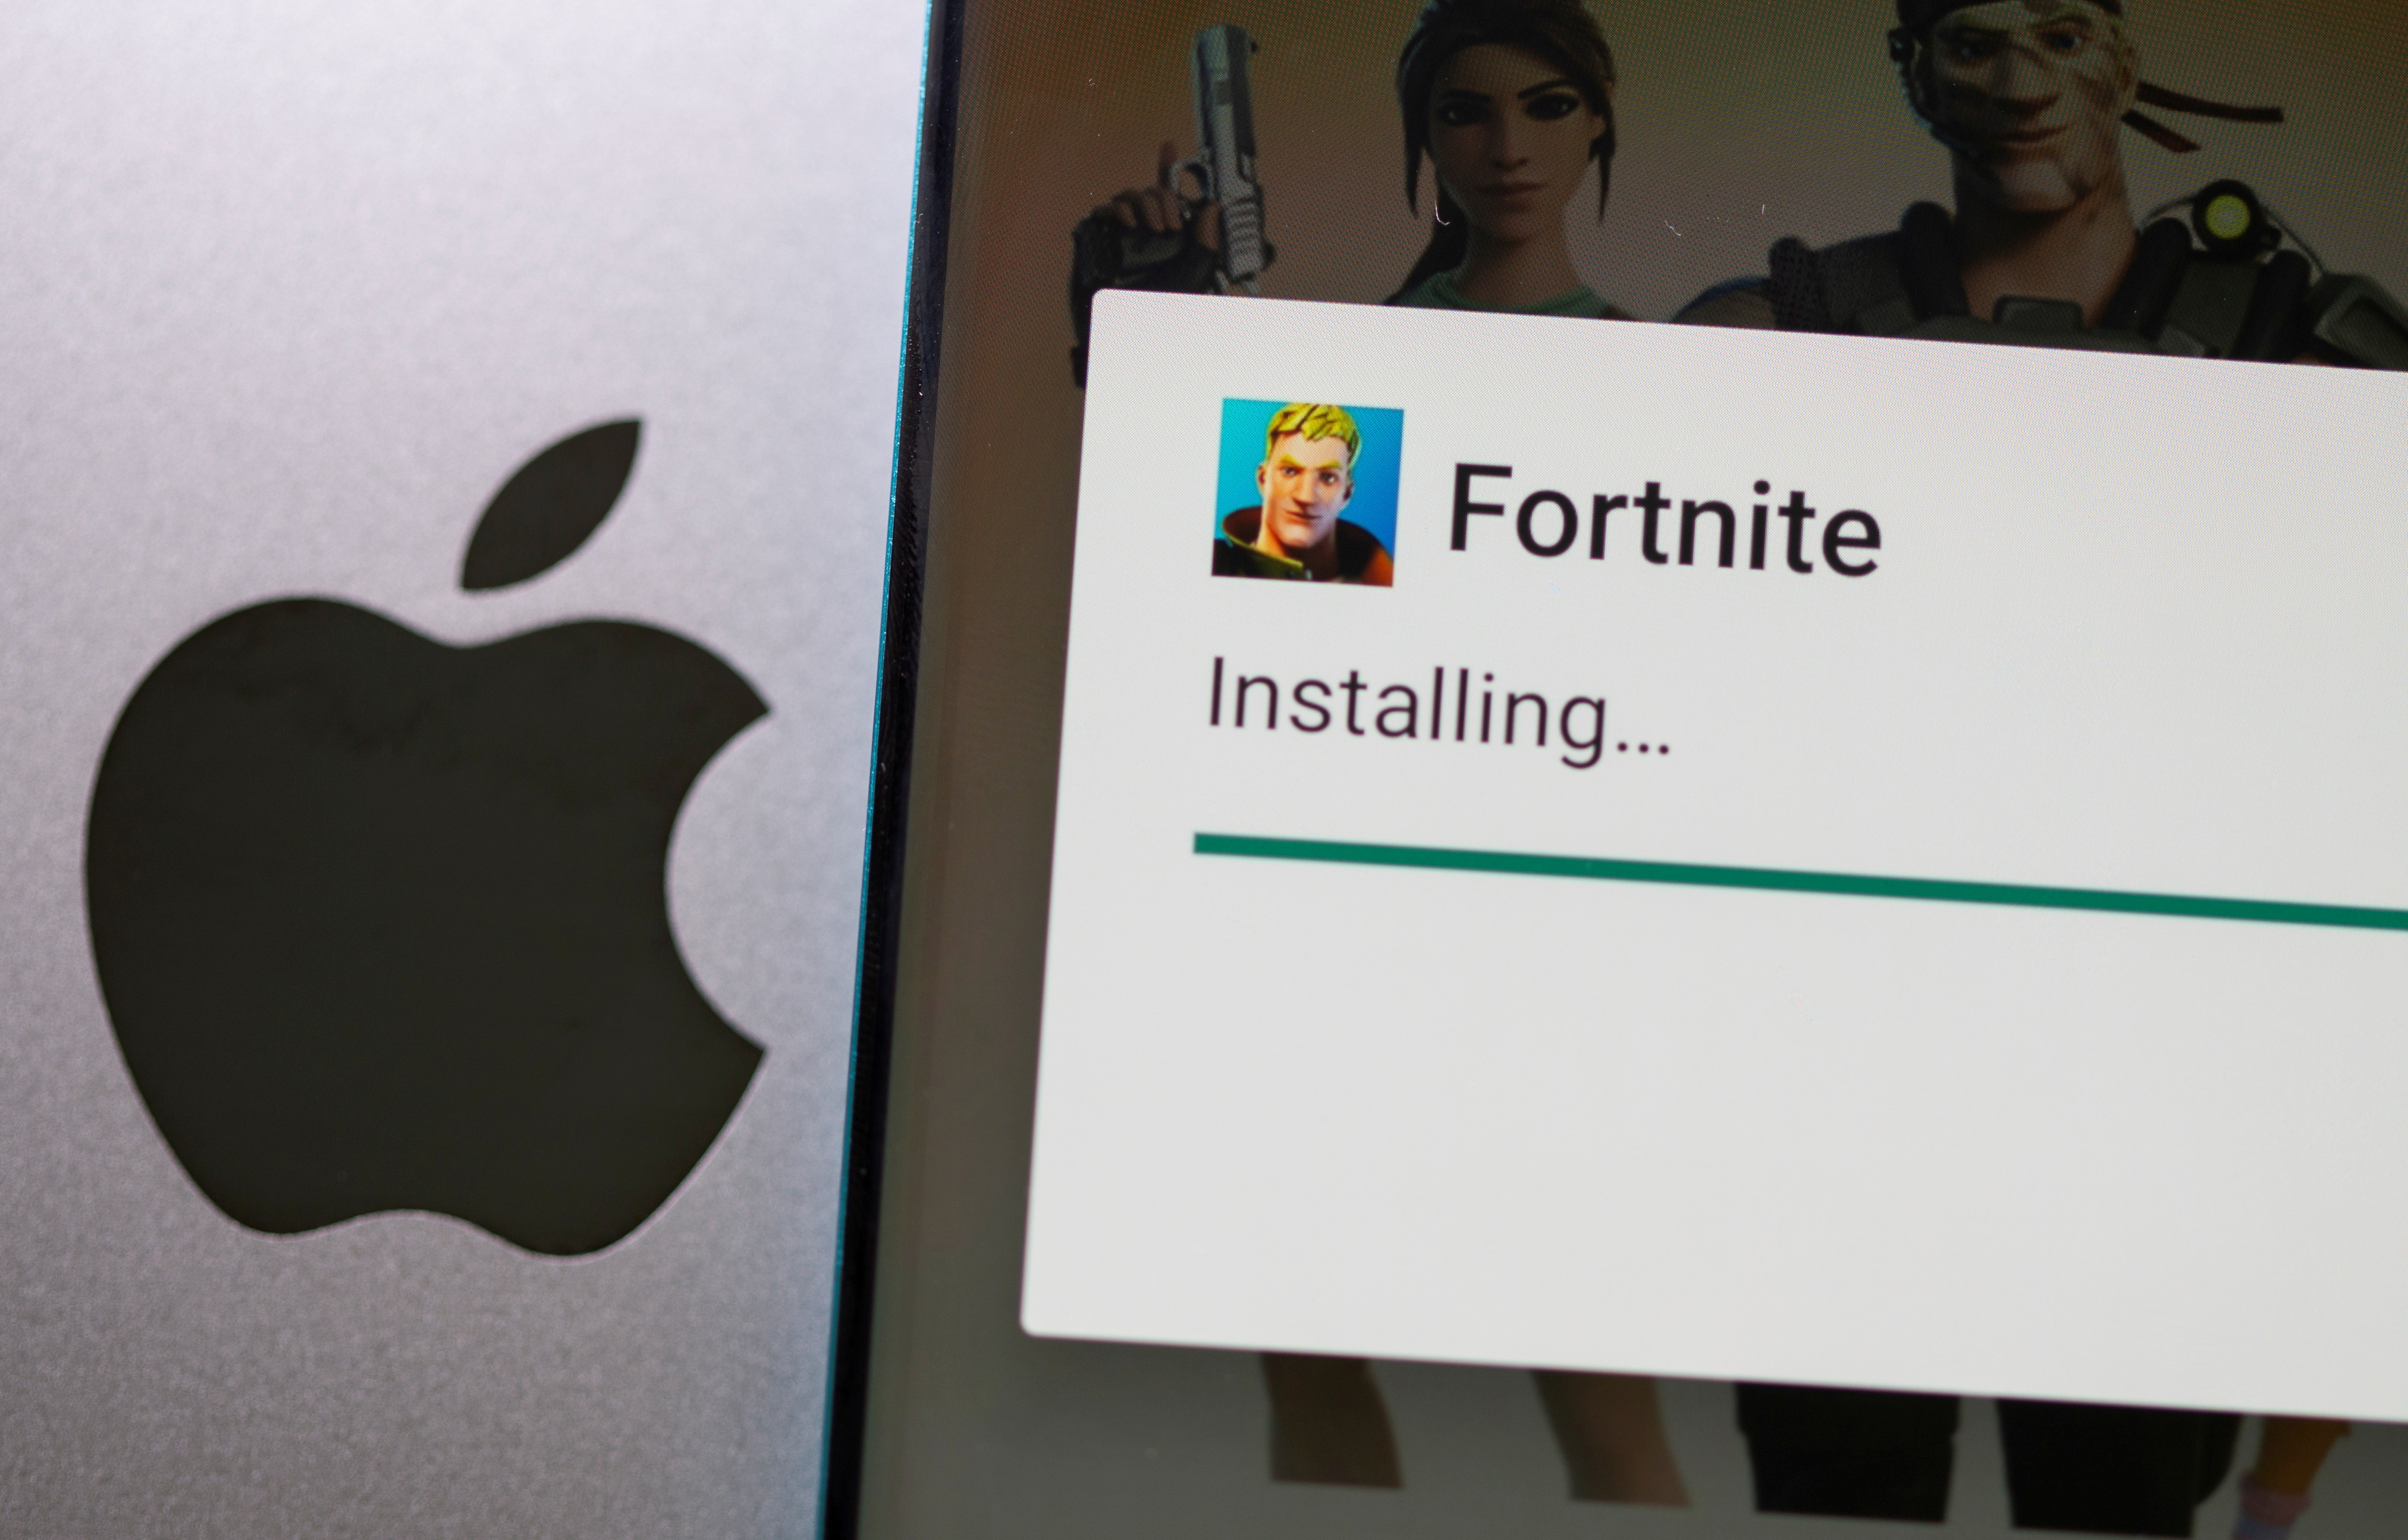 Fortnite installing on Android is seen in front of Apple logo in this illustration